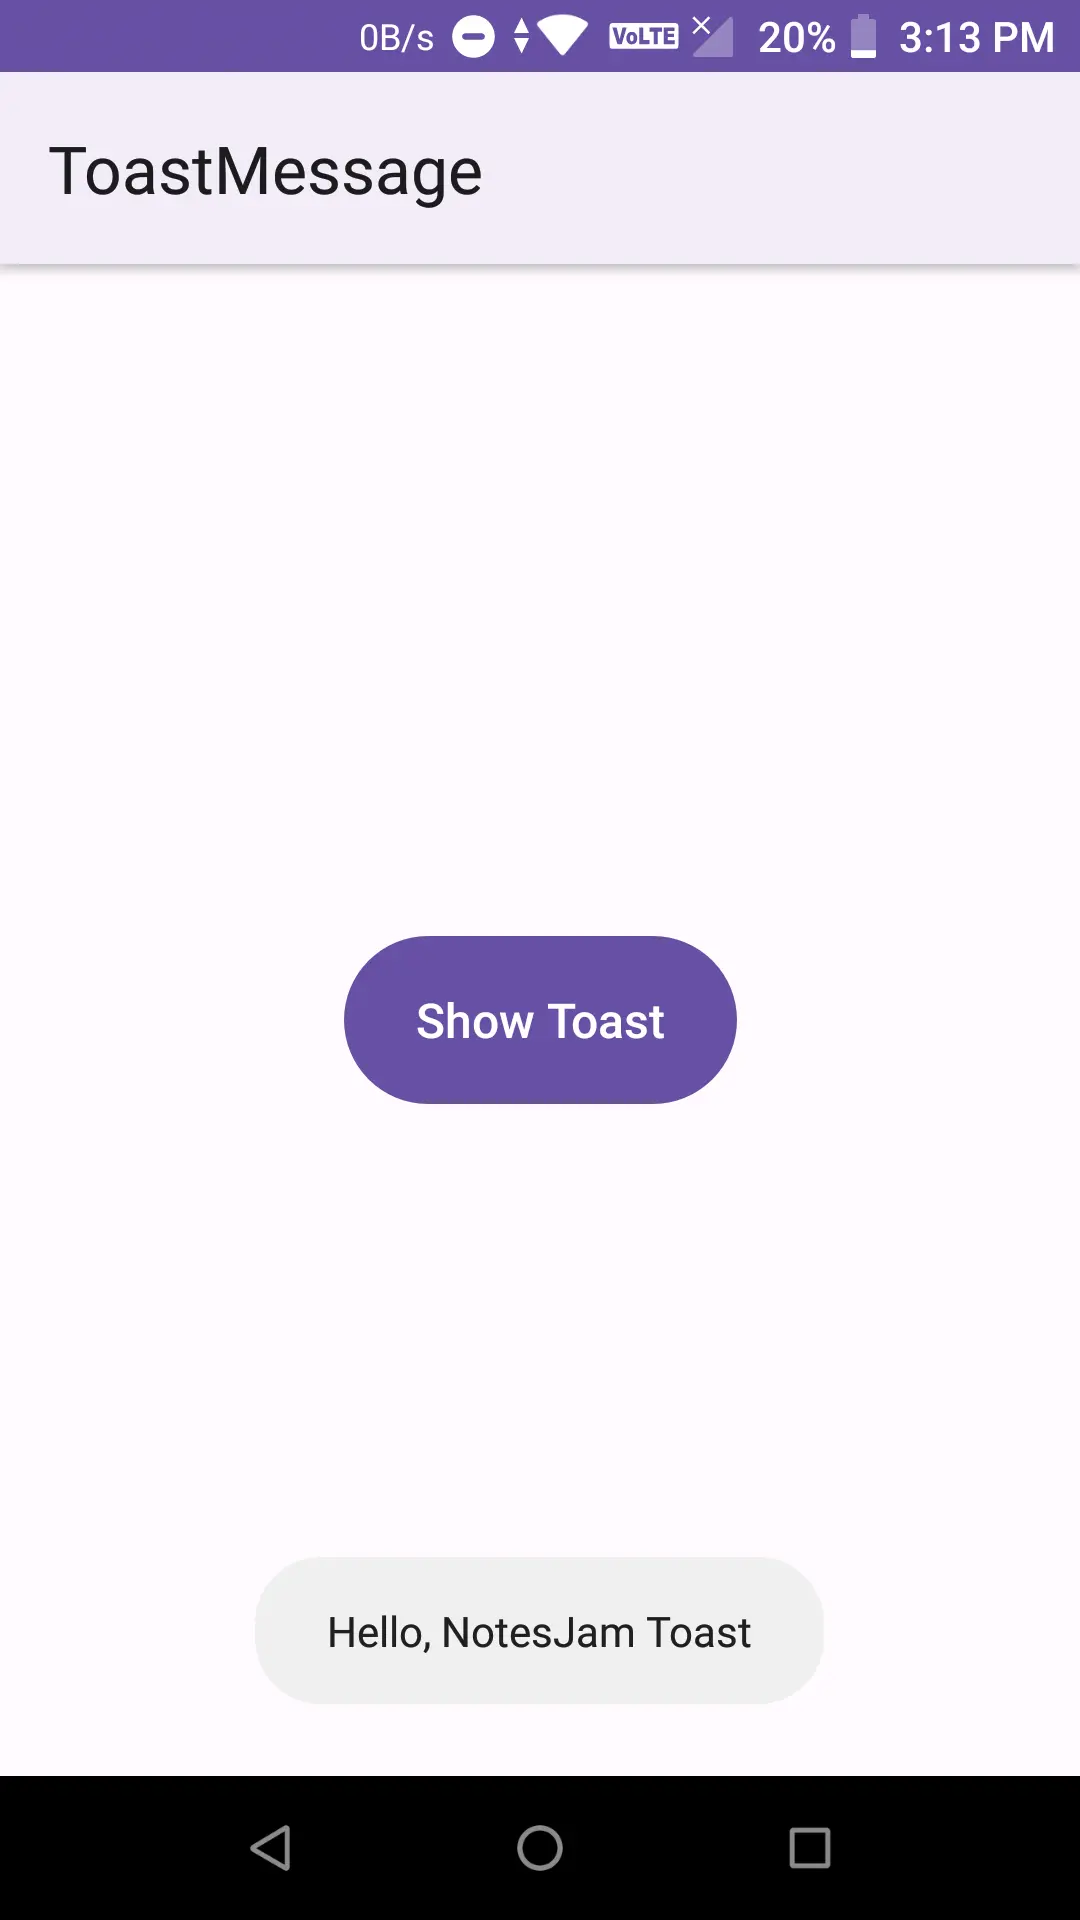 A screenshot of a Toast Message in Android